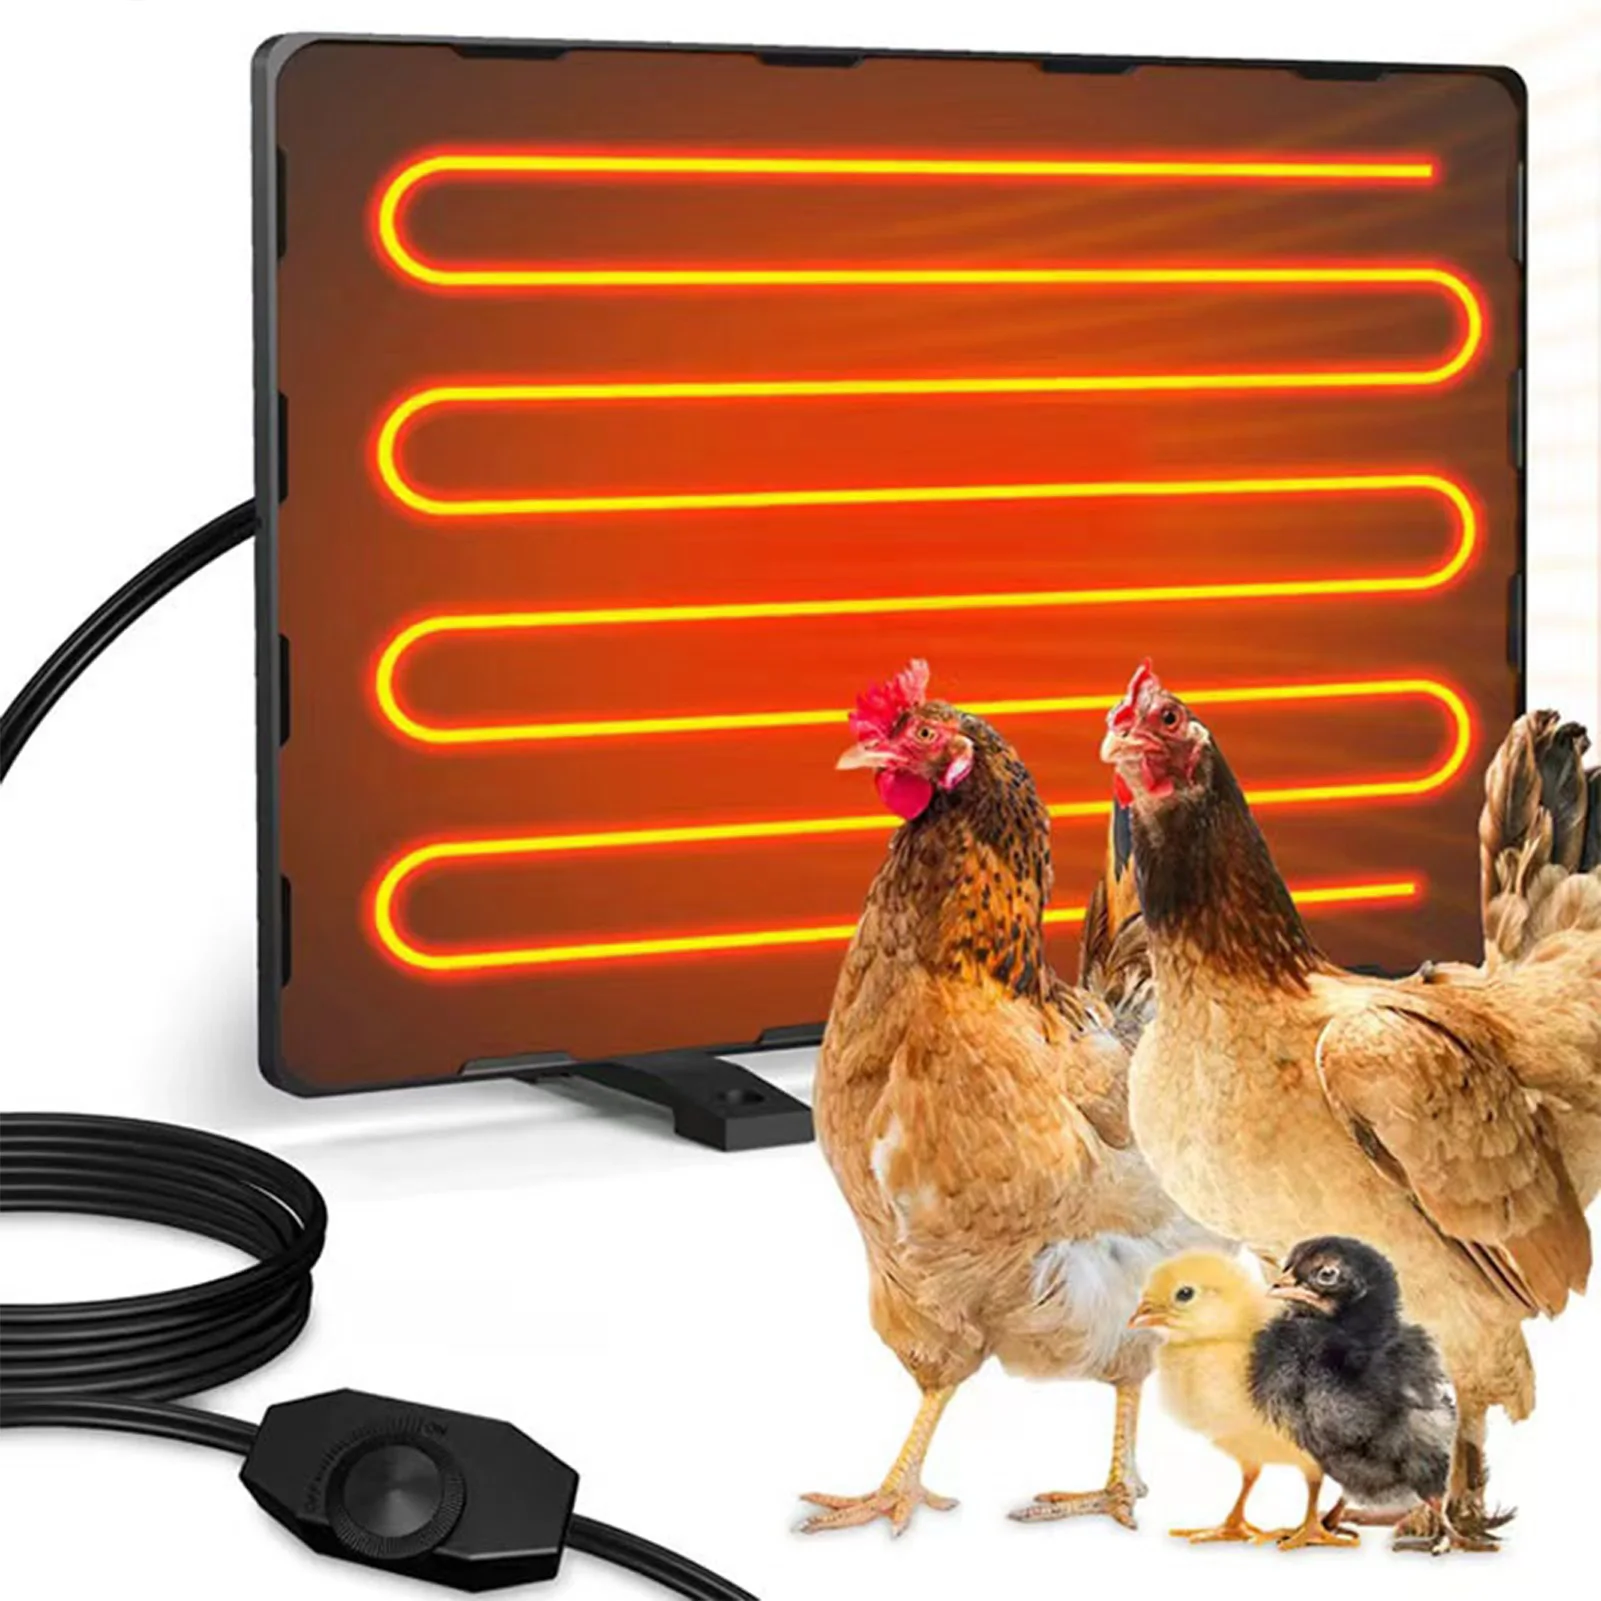 Coop Heater for Chicken Effective Radiant Heat Range within 16''/40cm Continuous Operation or 6/8/10/12H